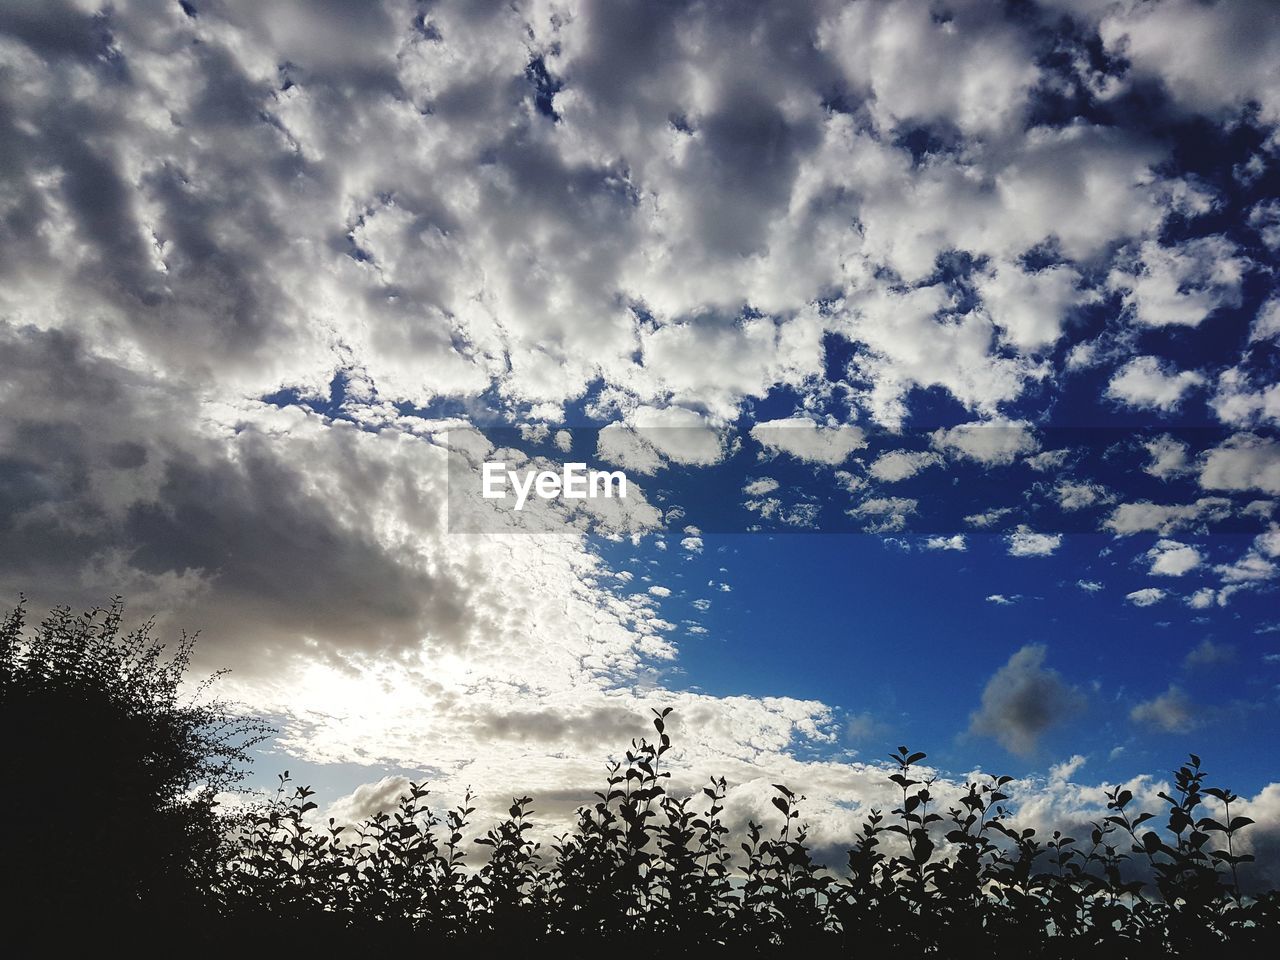 LOW ANGLE VIEW OF SKY AND TREES AGAINST CLOUDY BLUE